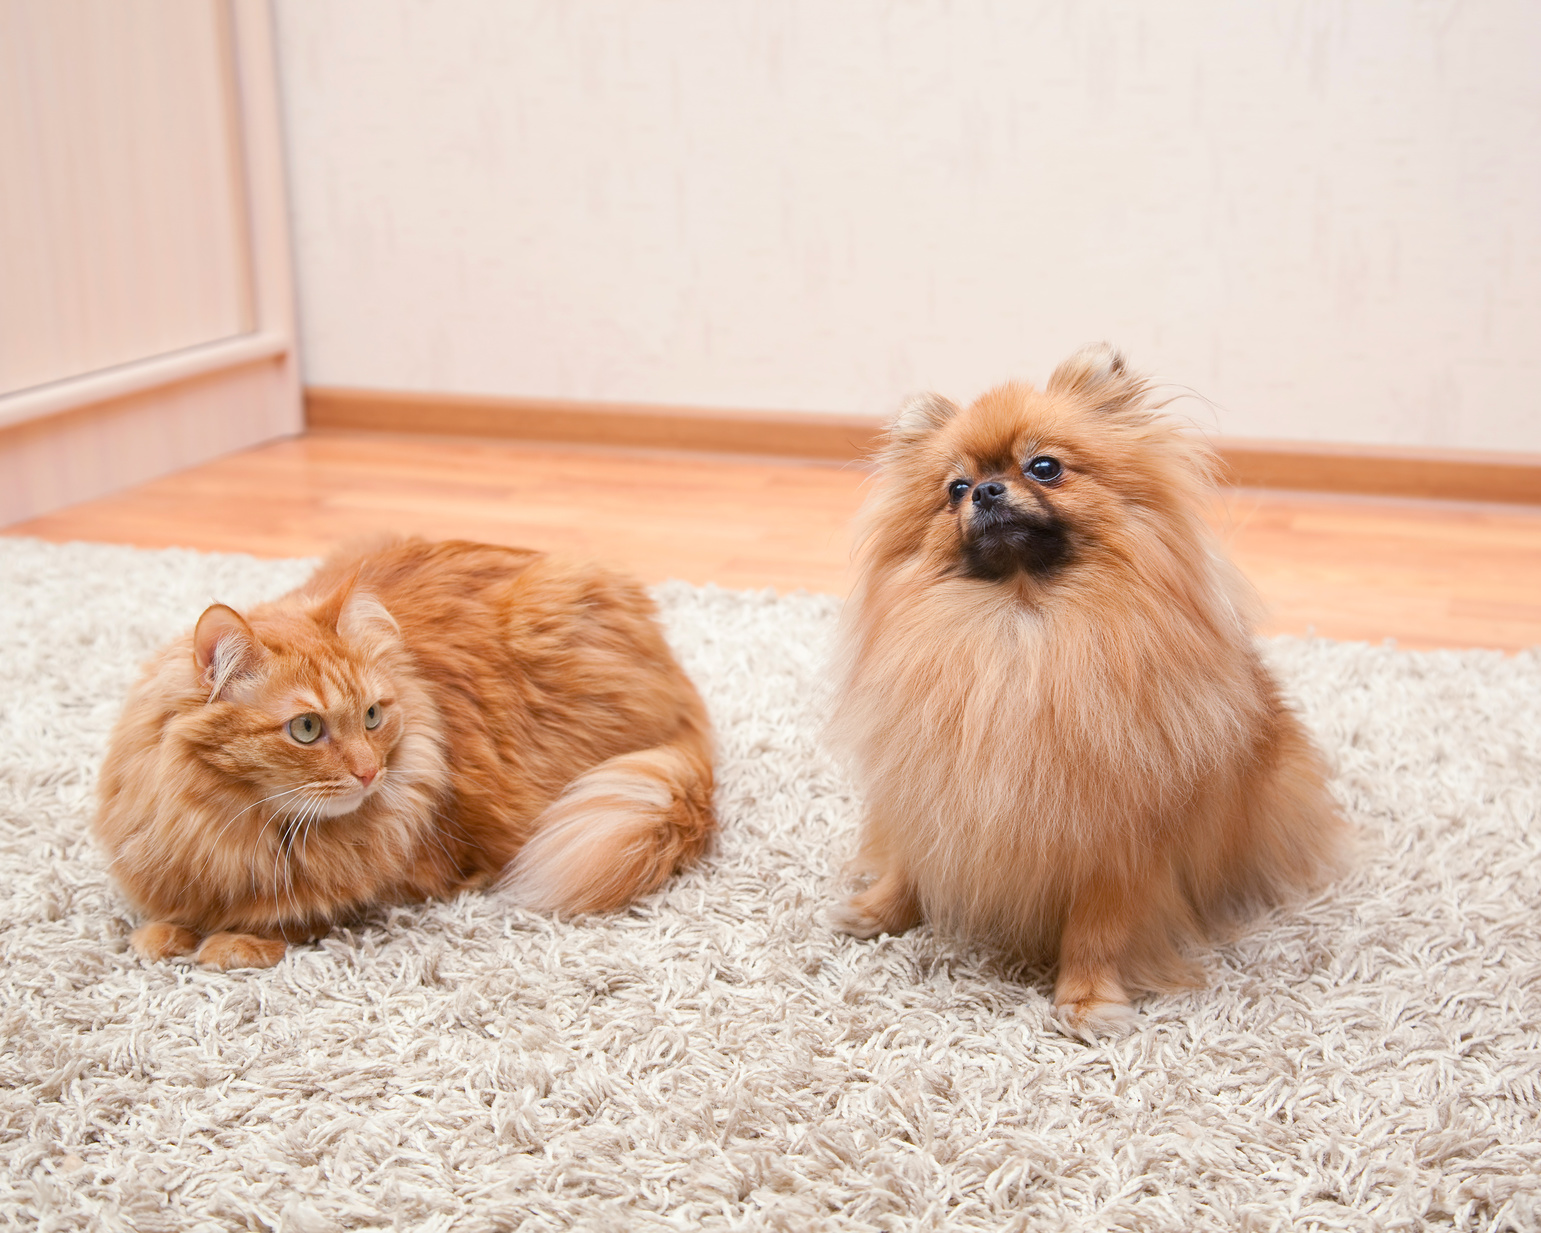 Pomeranian dog and red cat sitting on the carpet